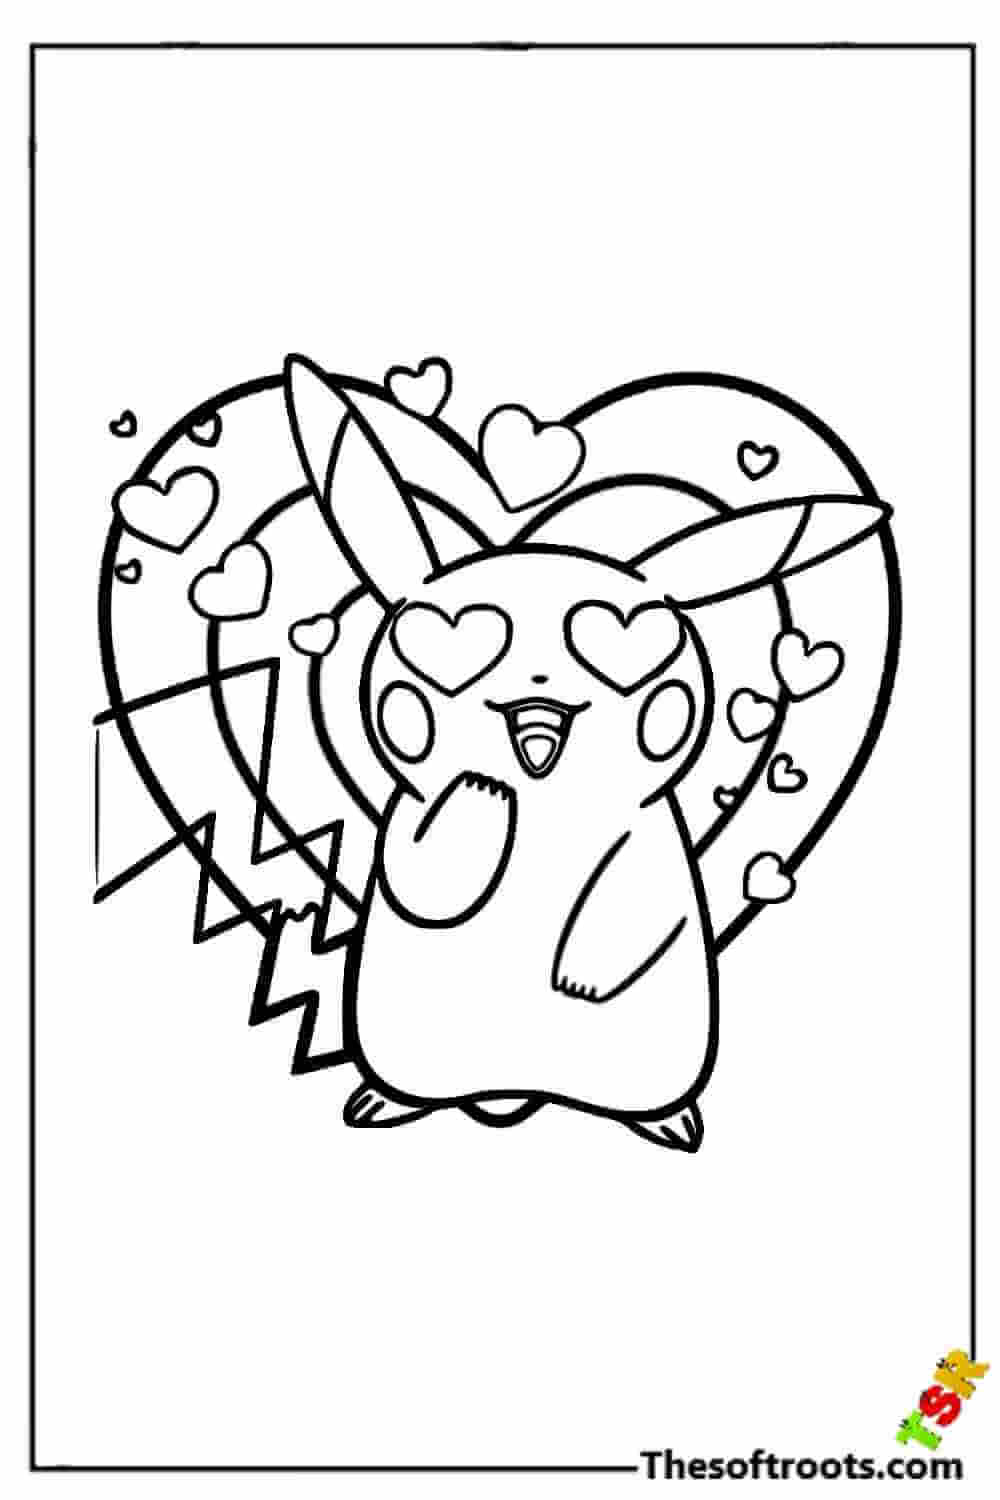 Valentine Pikachu coloring pages